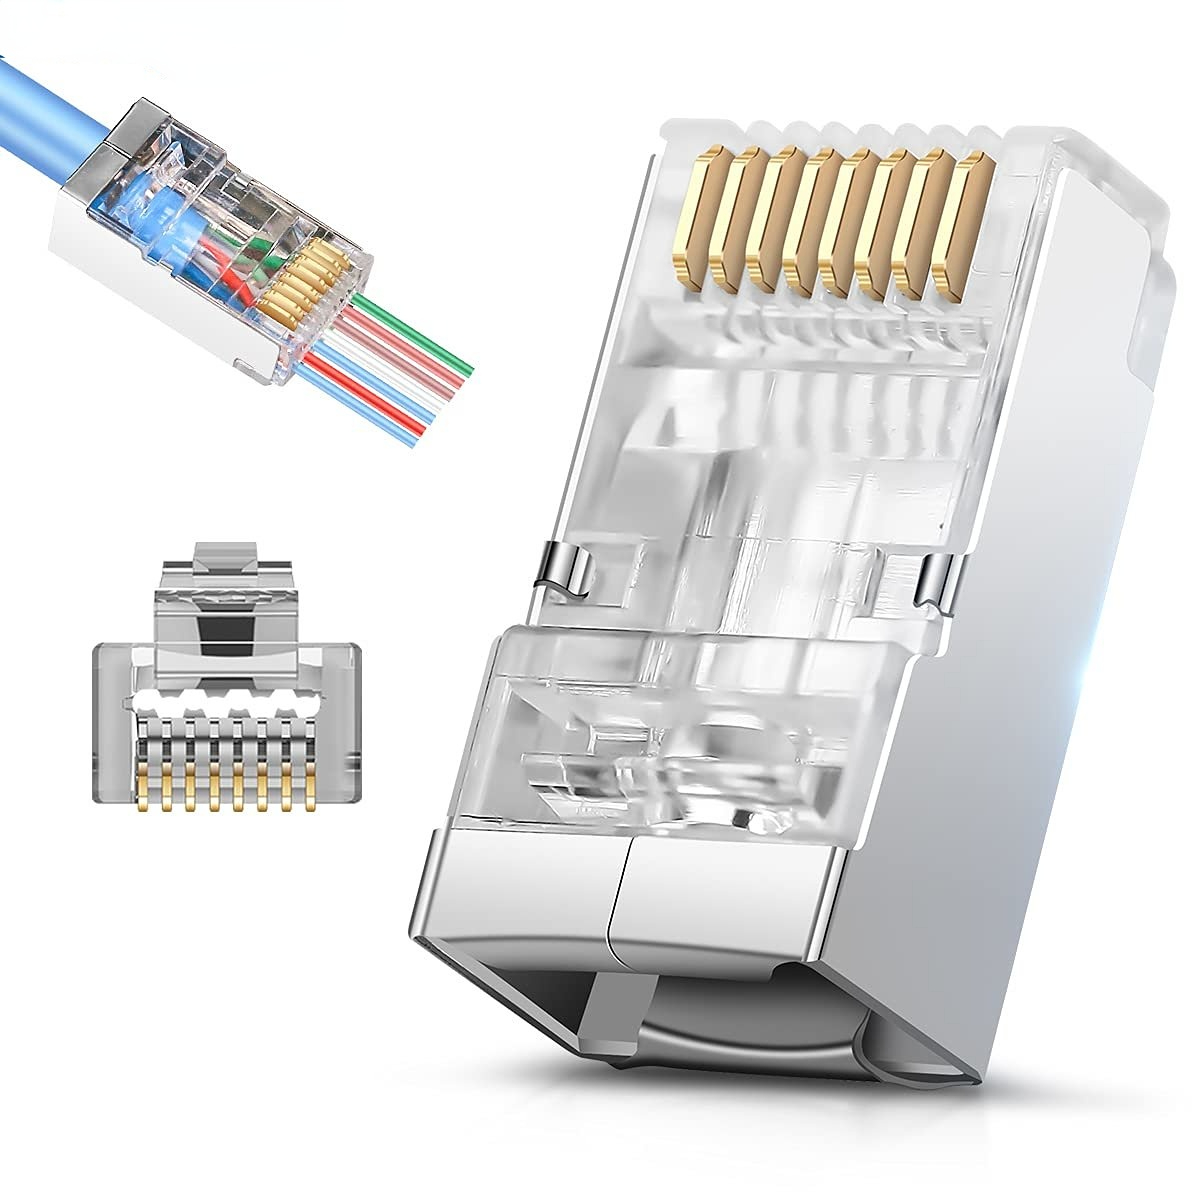 Tool-free RJ45 network connector CAT 6A STP shielded - Plug RJ45 - Passive  Components - Networking